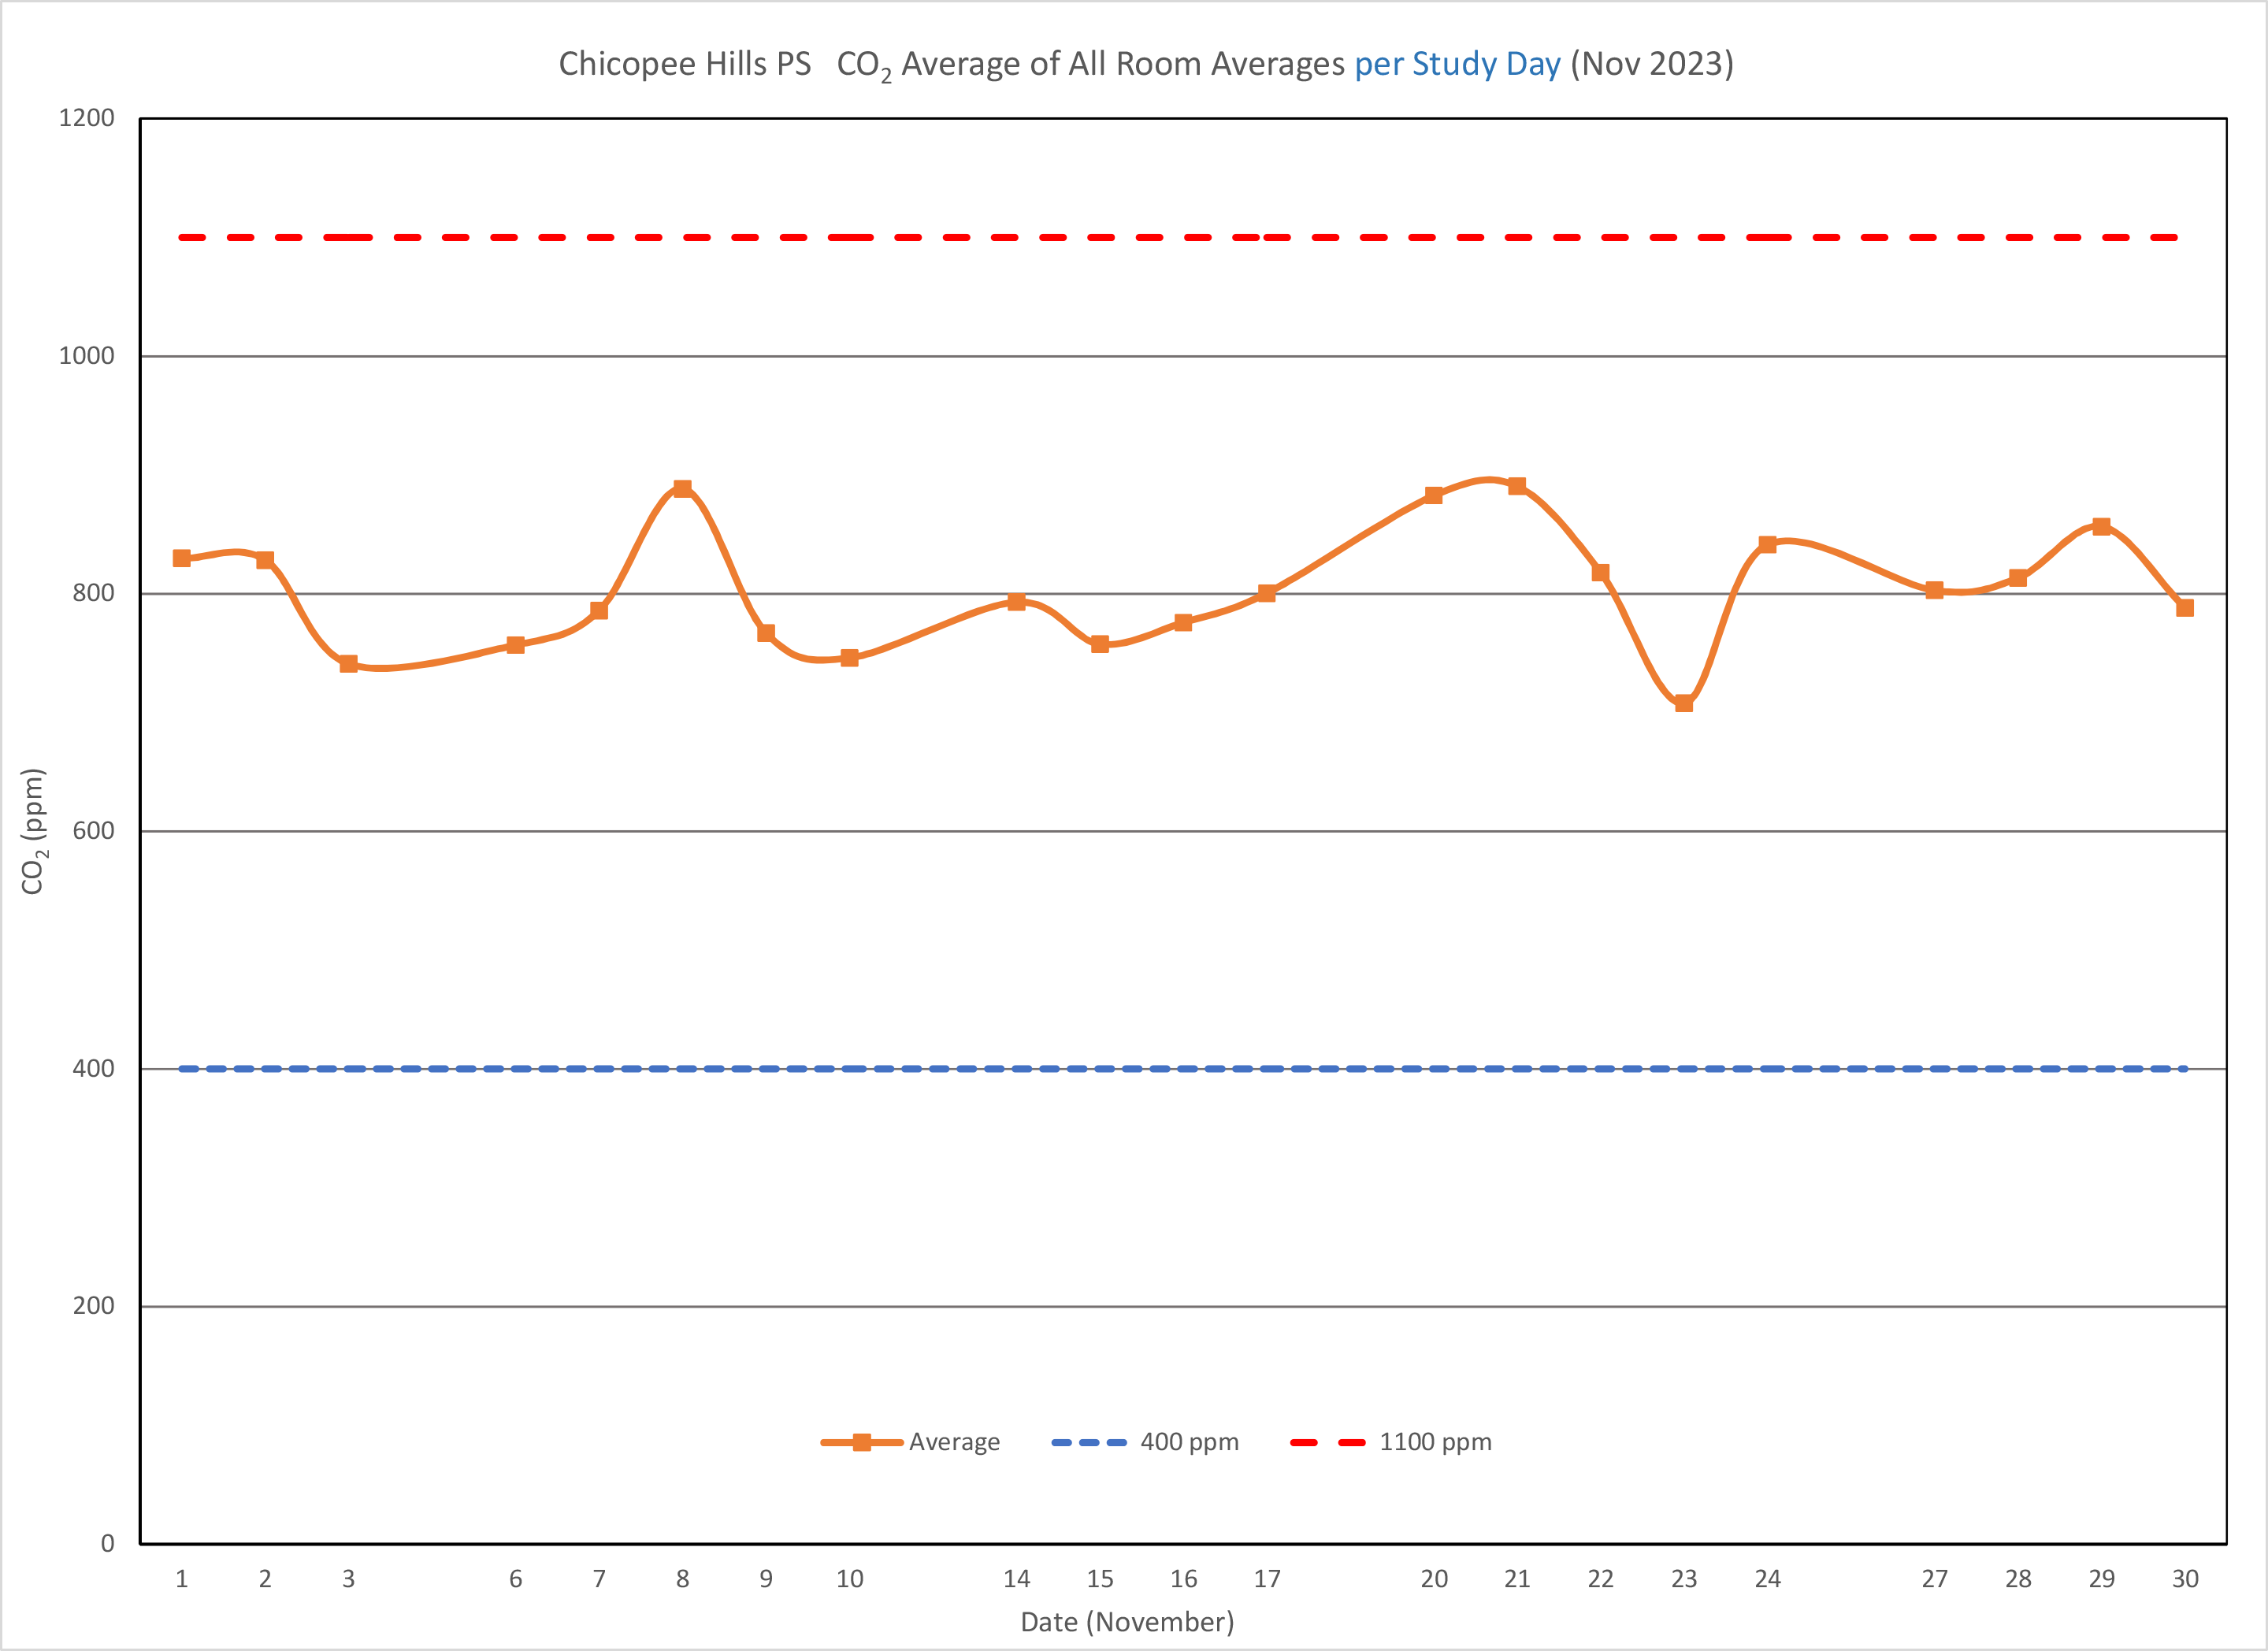 A graph showing that the average CO2 levels across Chicopee Hills Public School during the month of November 2023 fell between 700 and 900 parts per million.